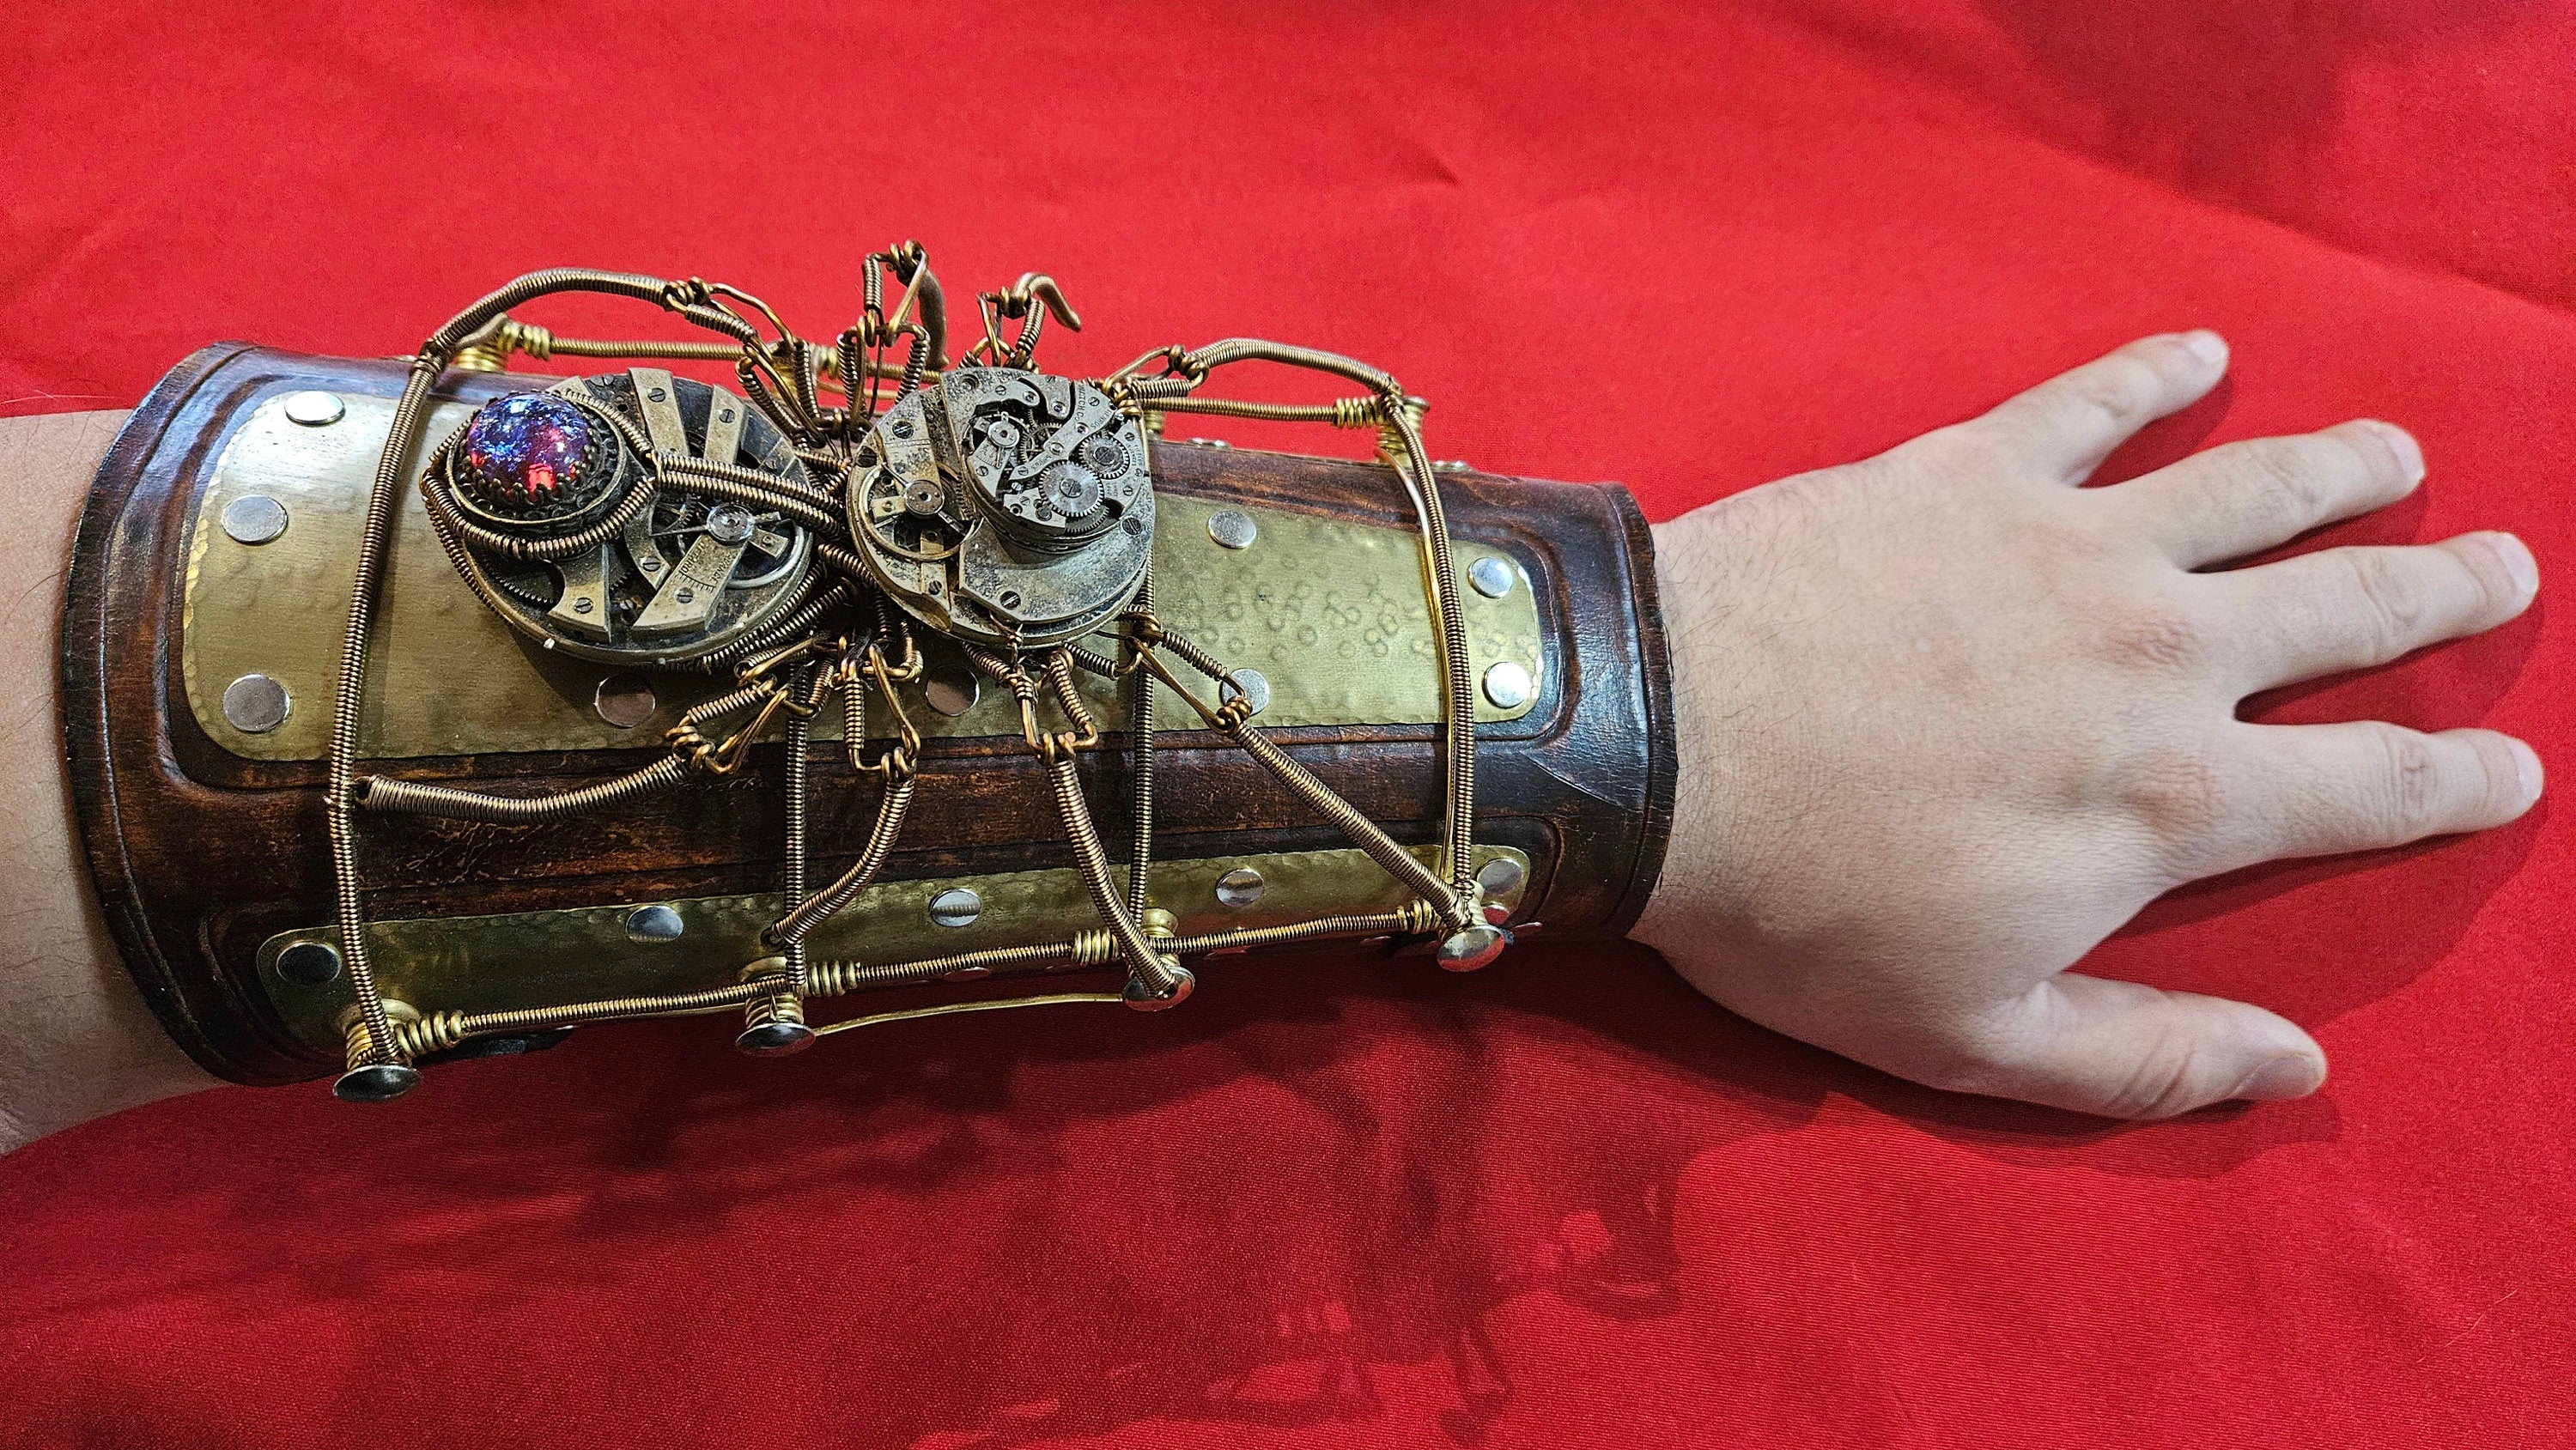 Ethereal Mechanist's Bracer - Handcrafted Steampunk Spider Bracer by Daniel Proulx - One of a Kind Artisan Design